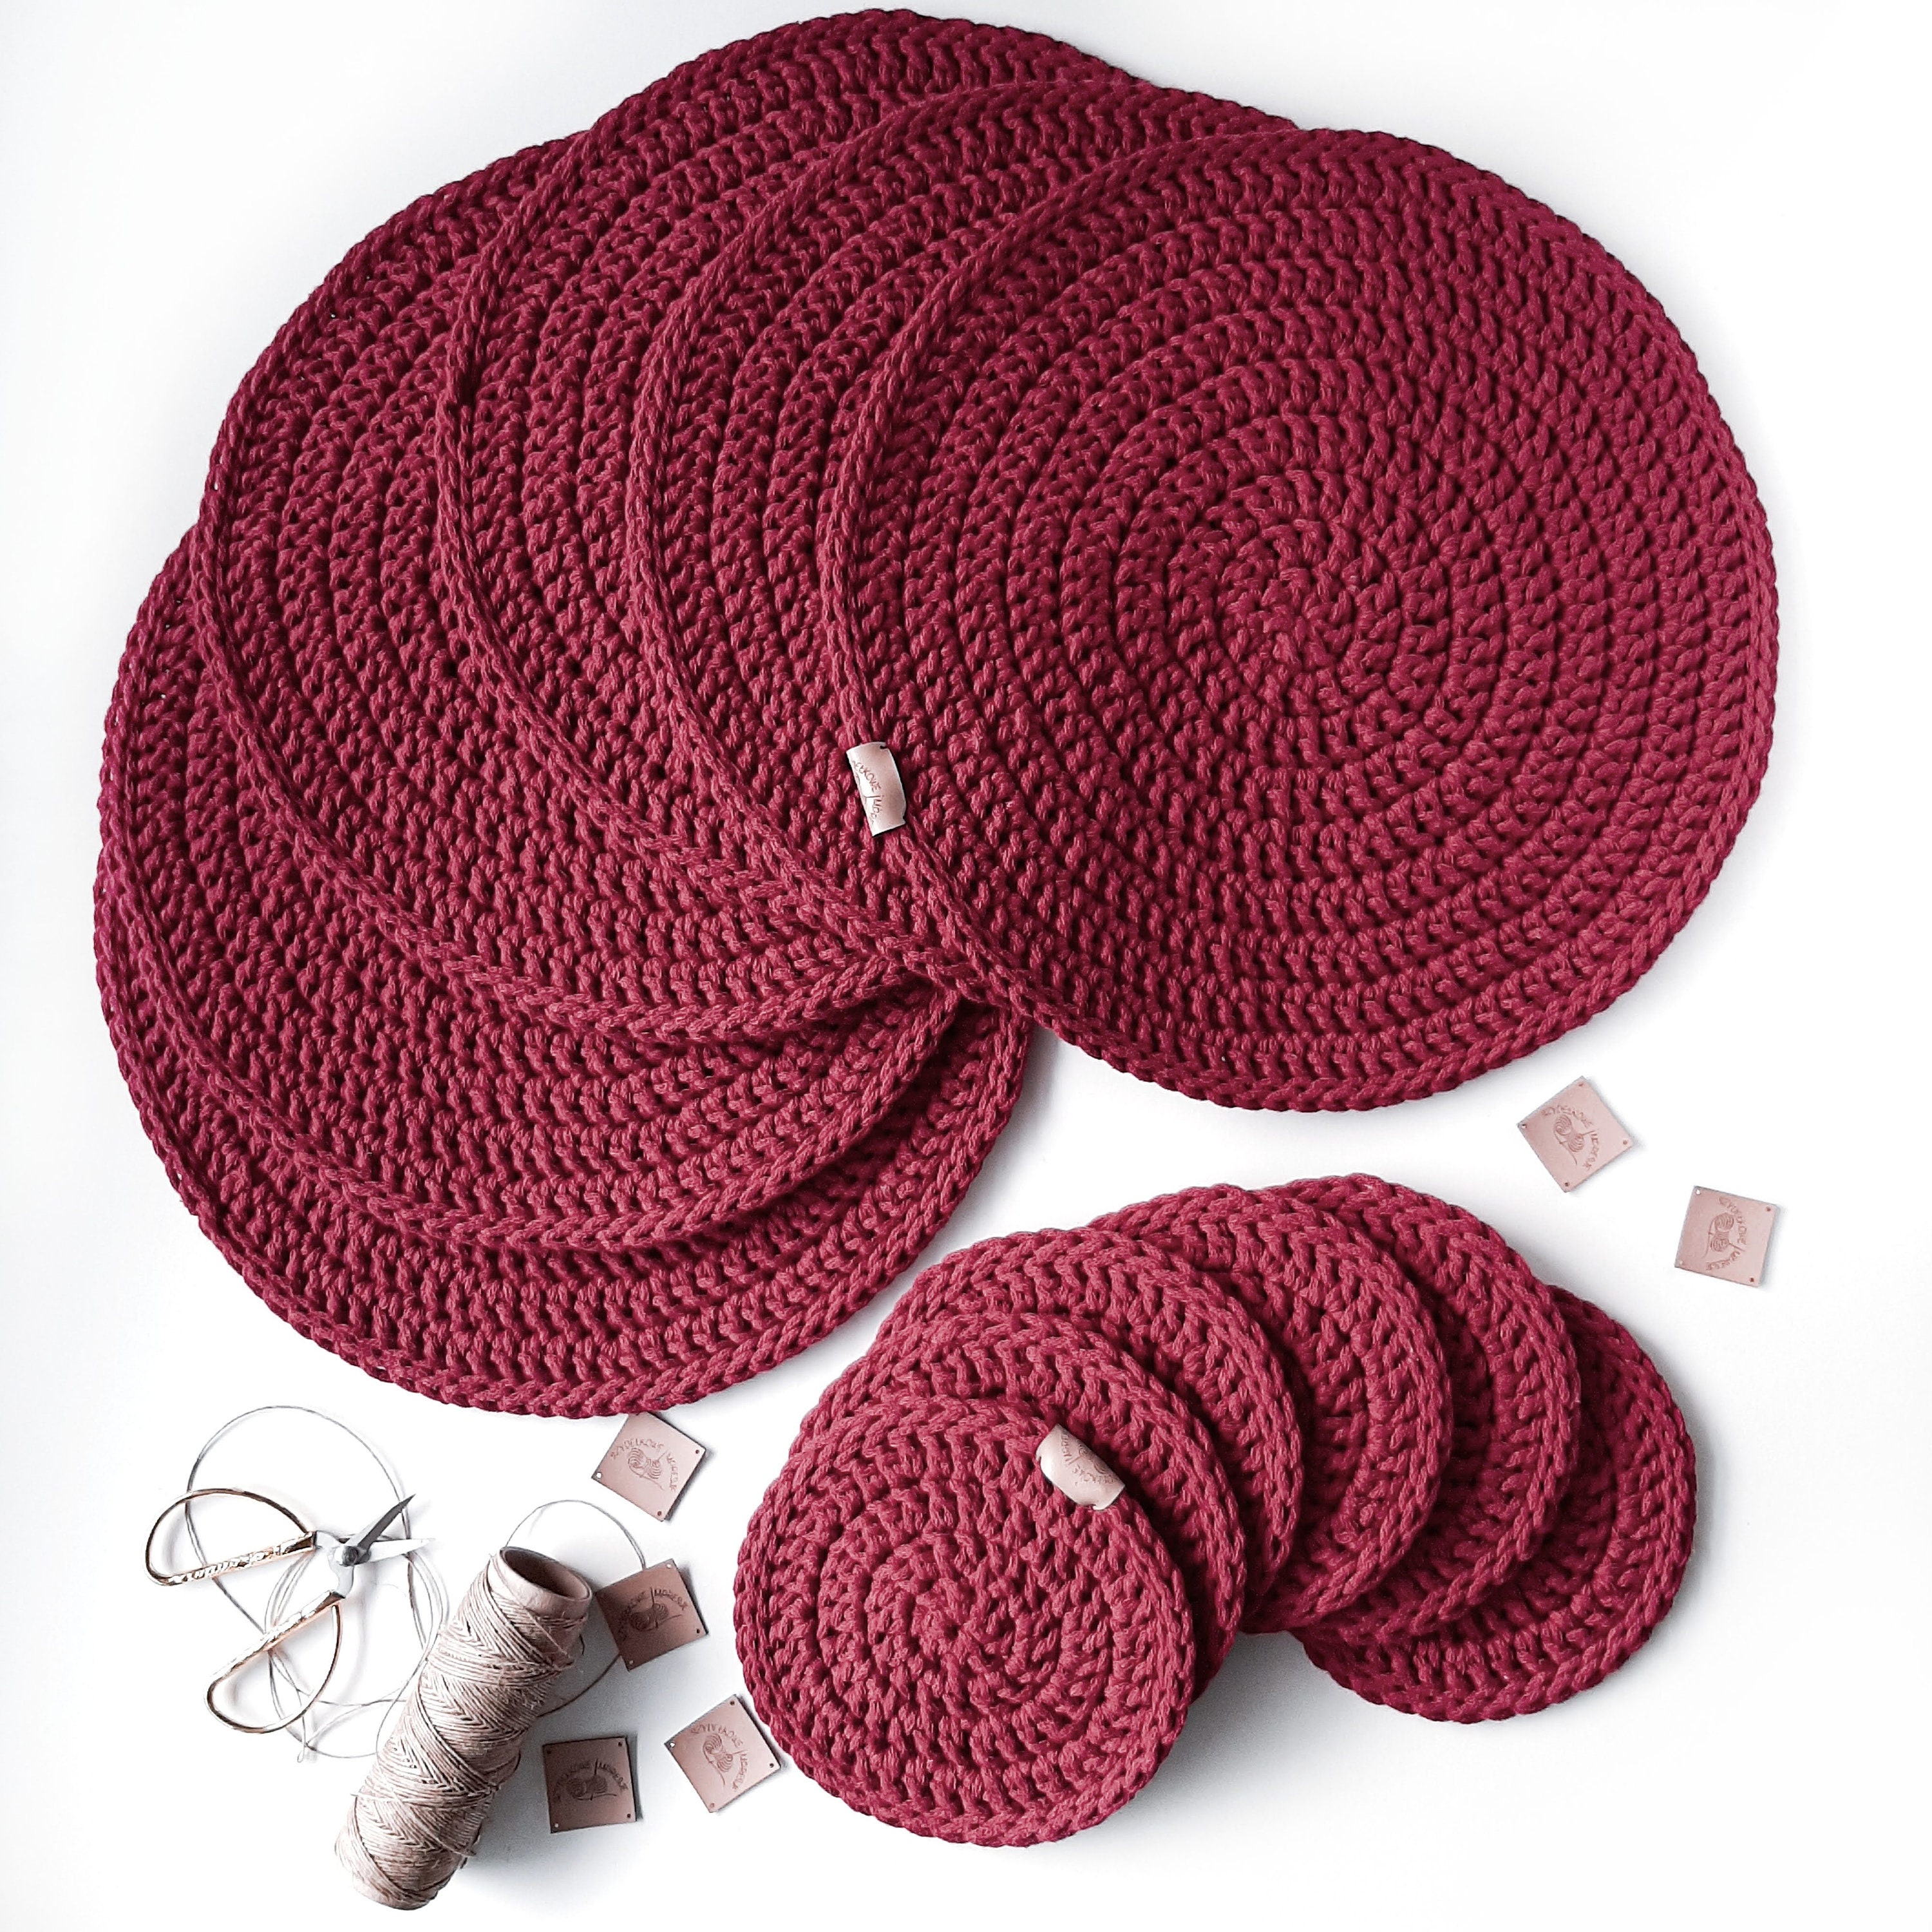 Organic Handwoven round table decor. crochet cotton coasters and placemats